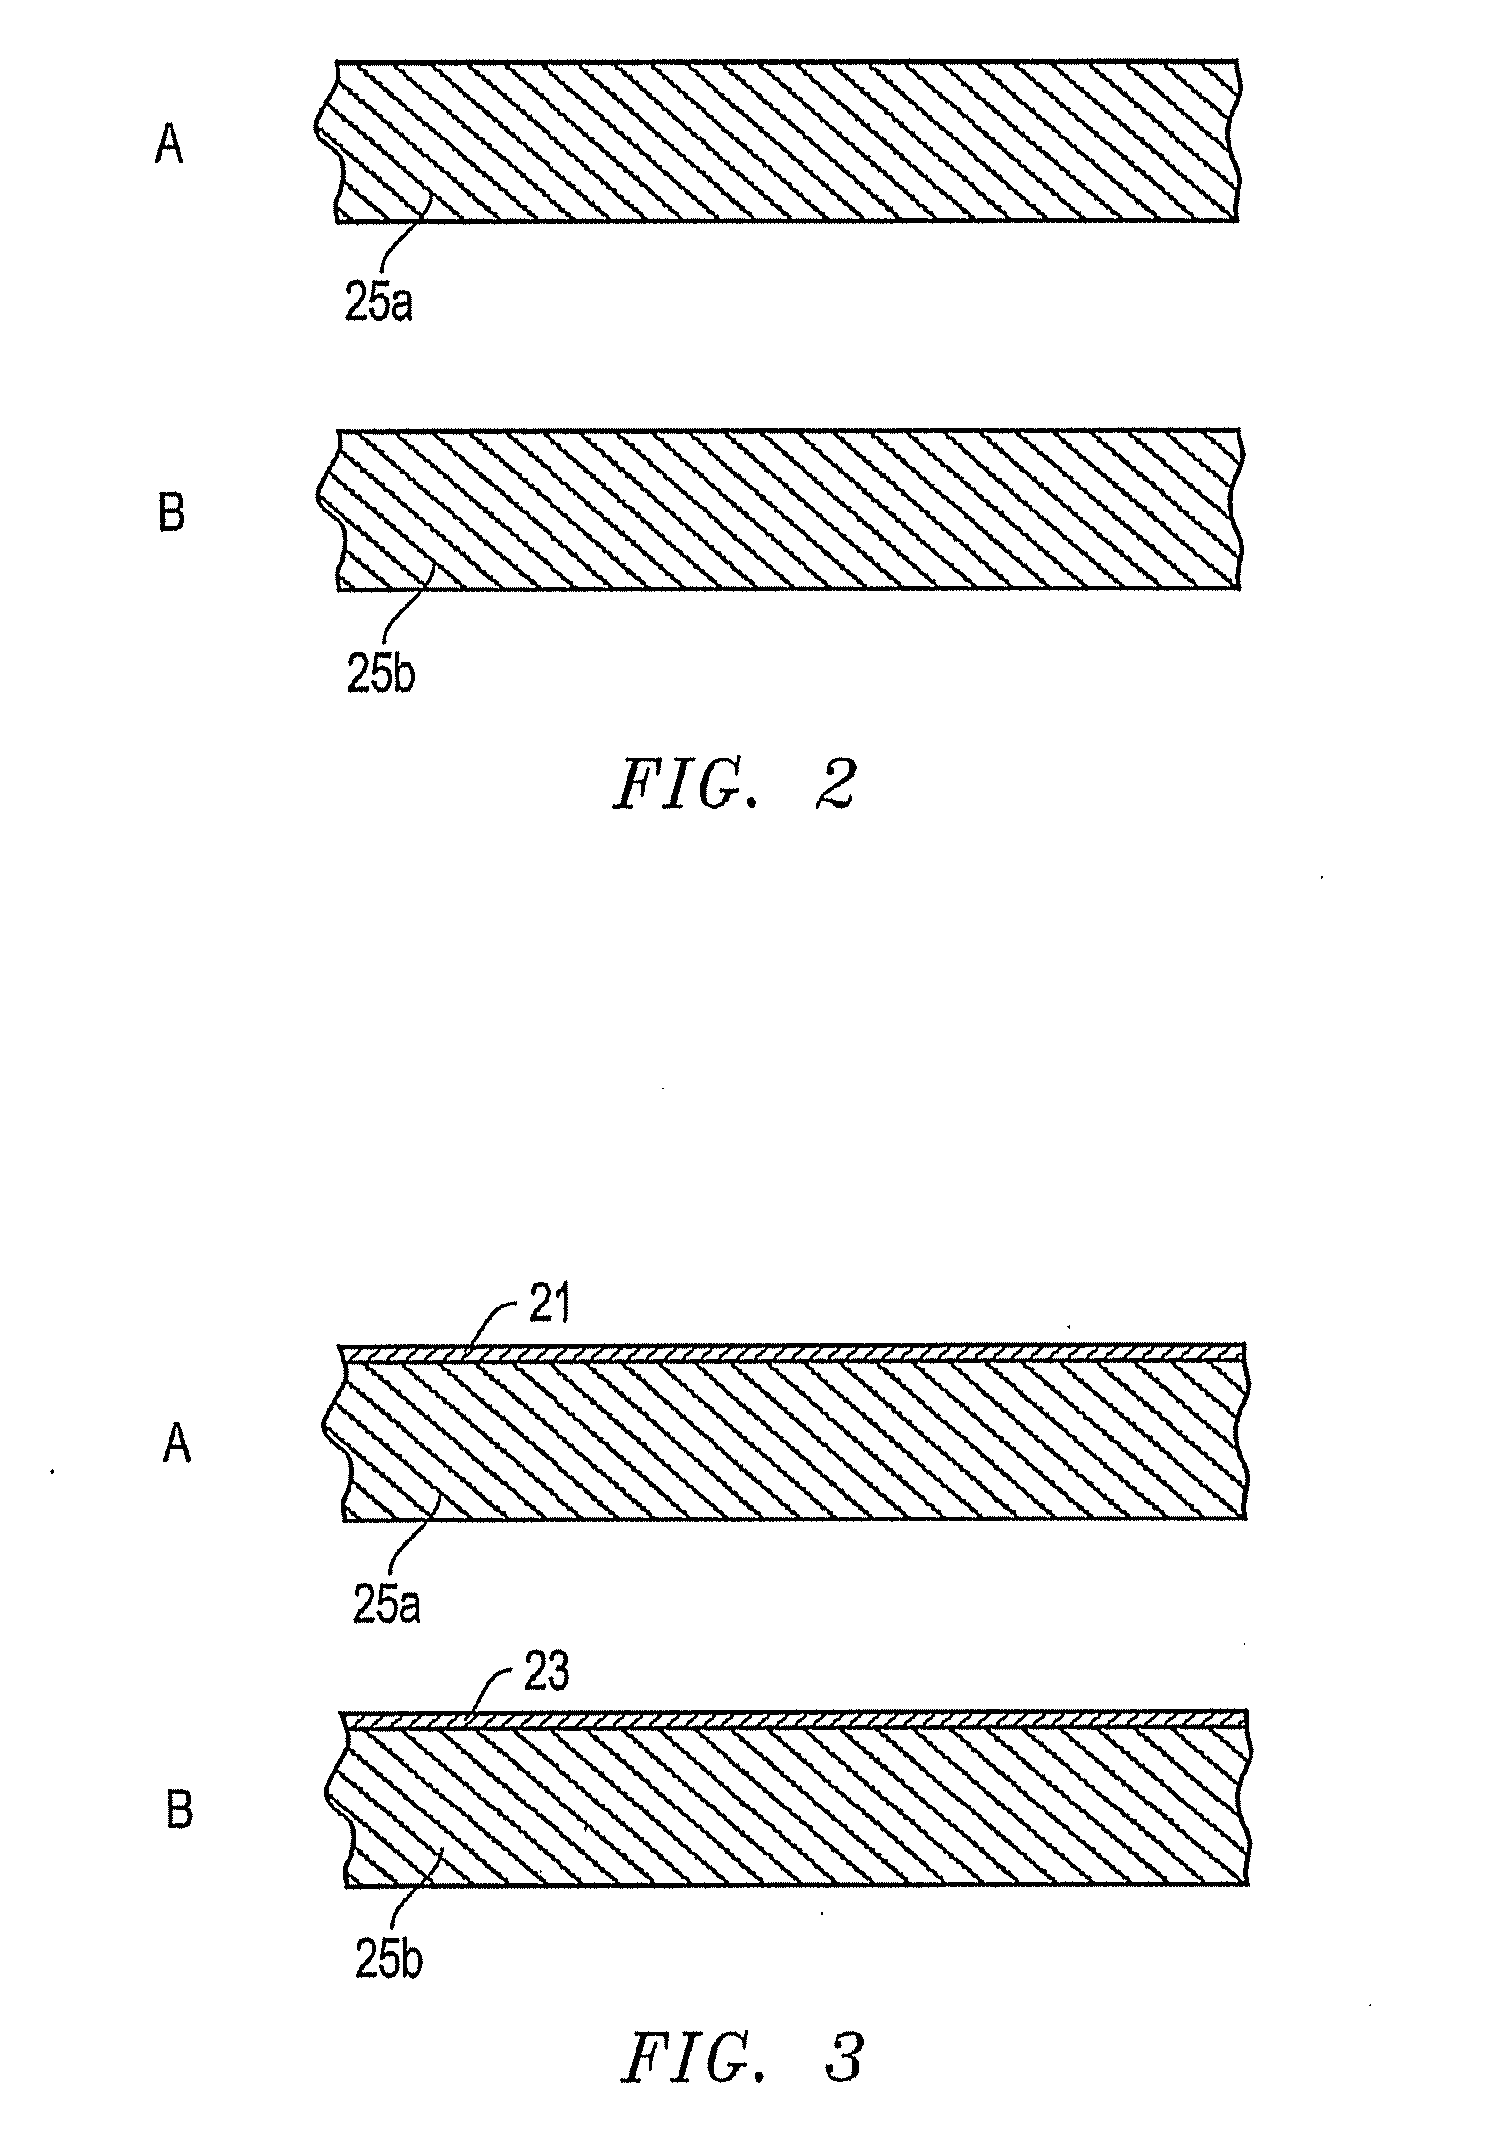 System, method, and apparatus for providing a temporary, deep shunt on wafer structures for electrostatic discharge protection during processing